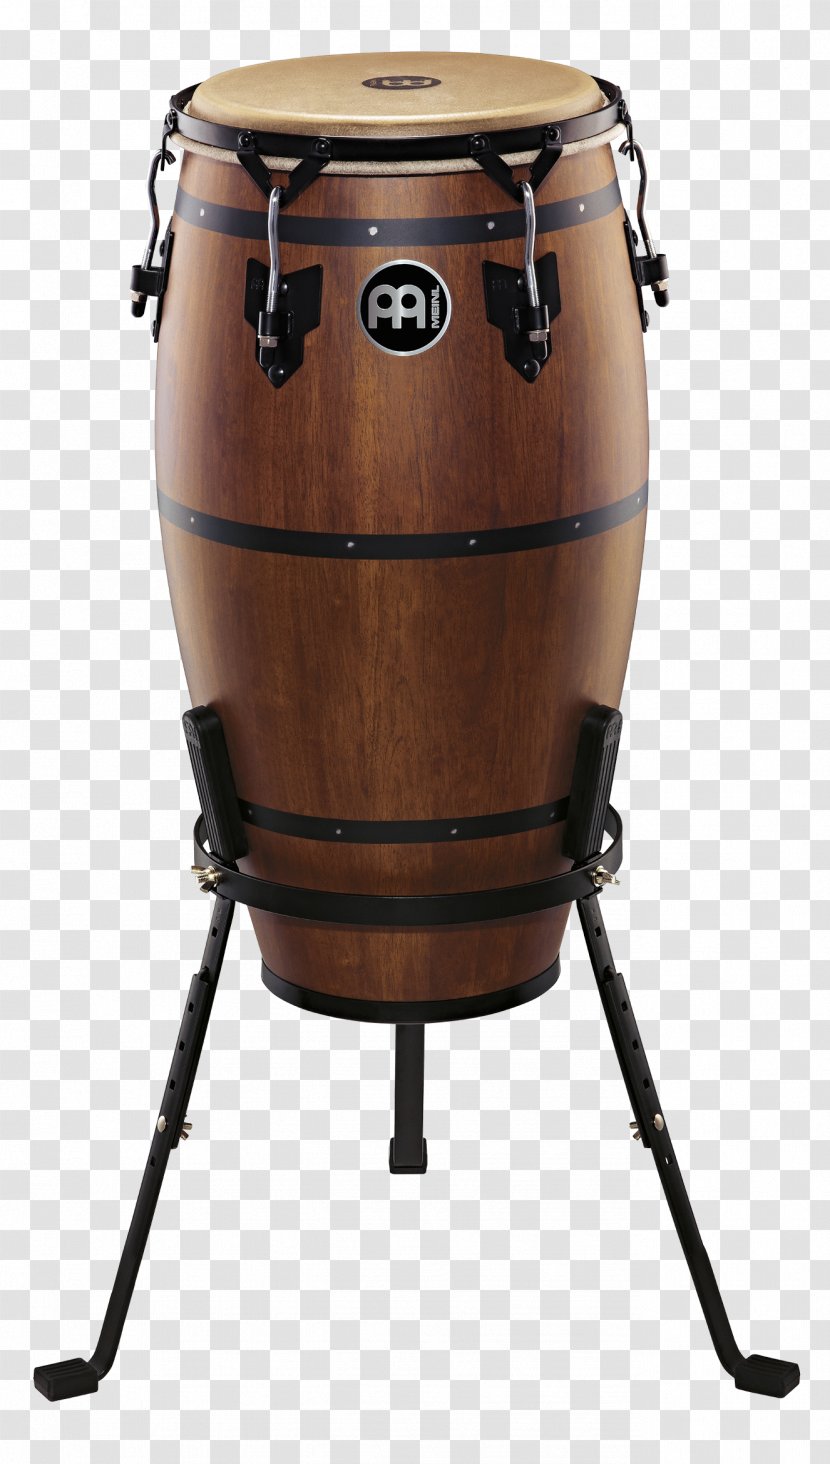 Conga Meinl Percussion Quinto Drums - Silhouette Transparent PNG